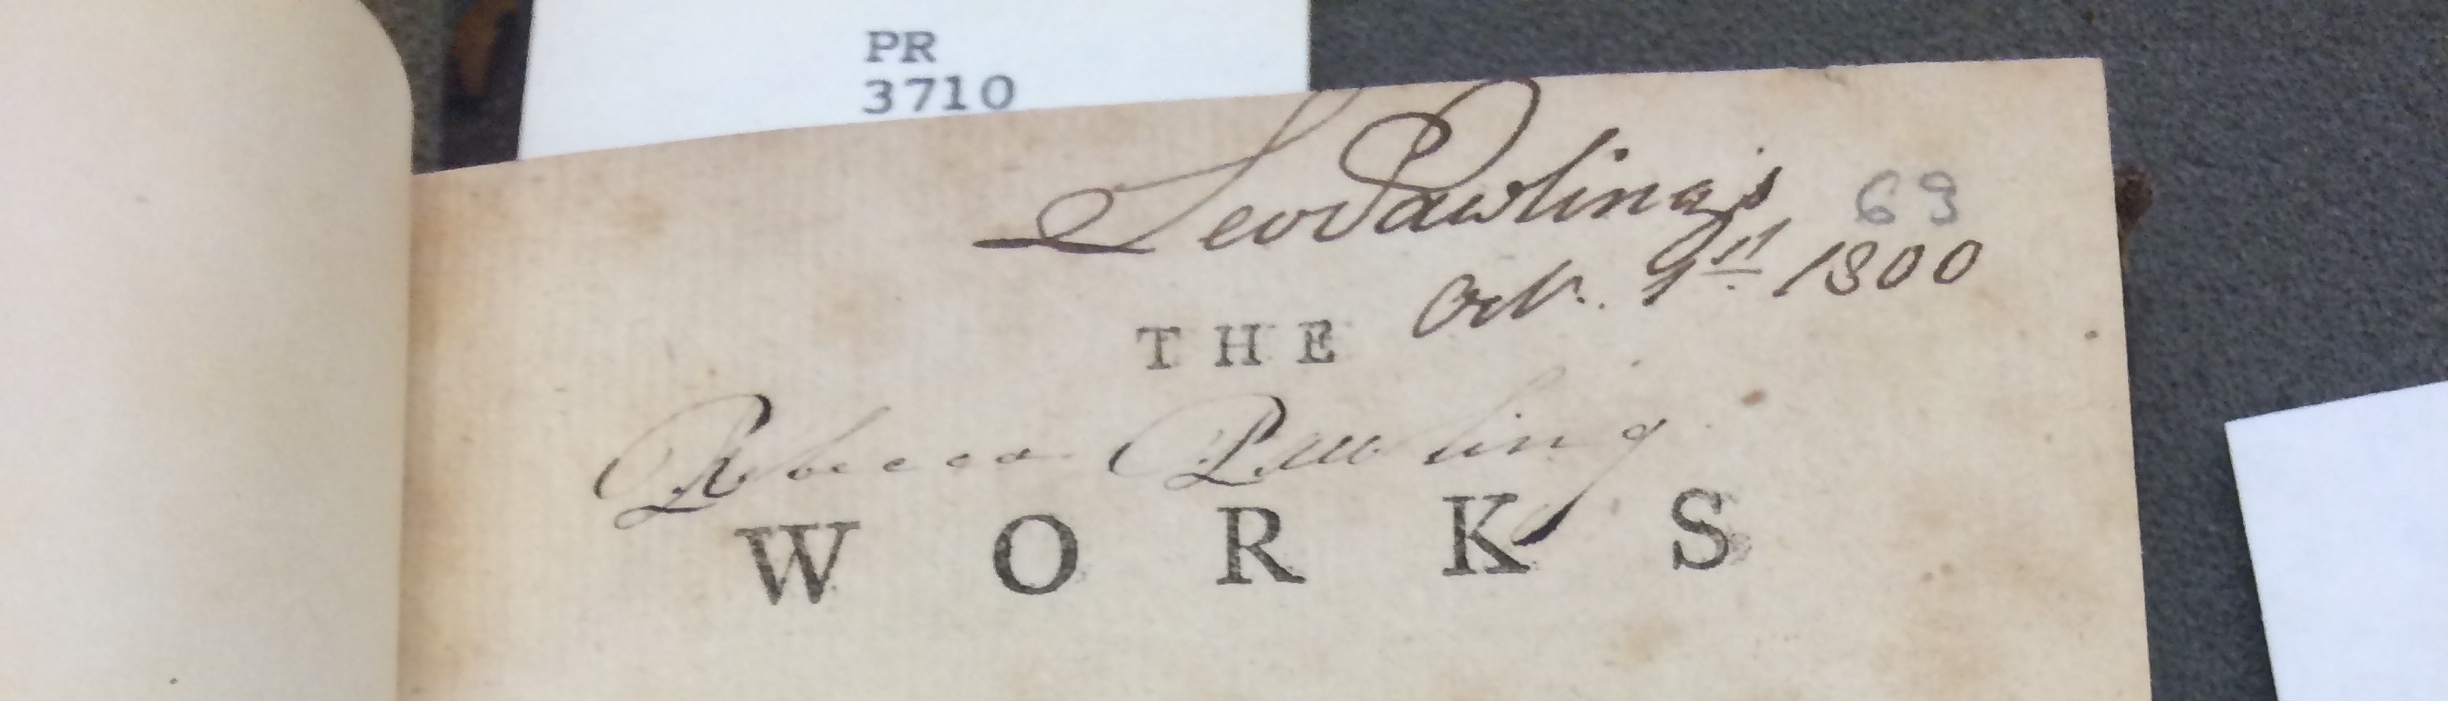 Accessing the Community of Readers: Marginalia in Rare Books Libraries